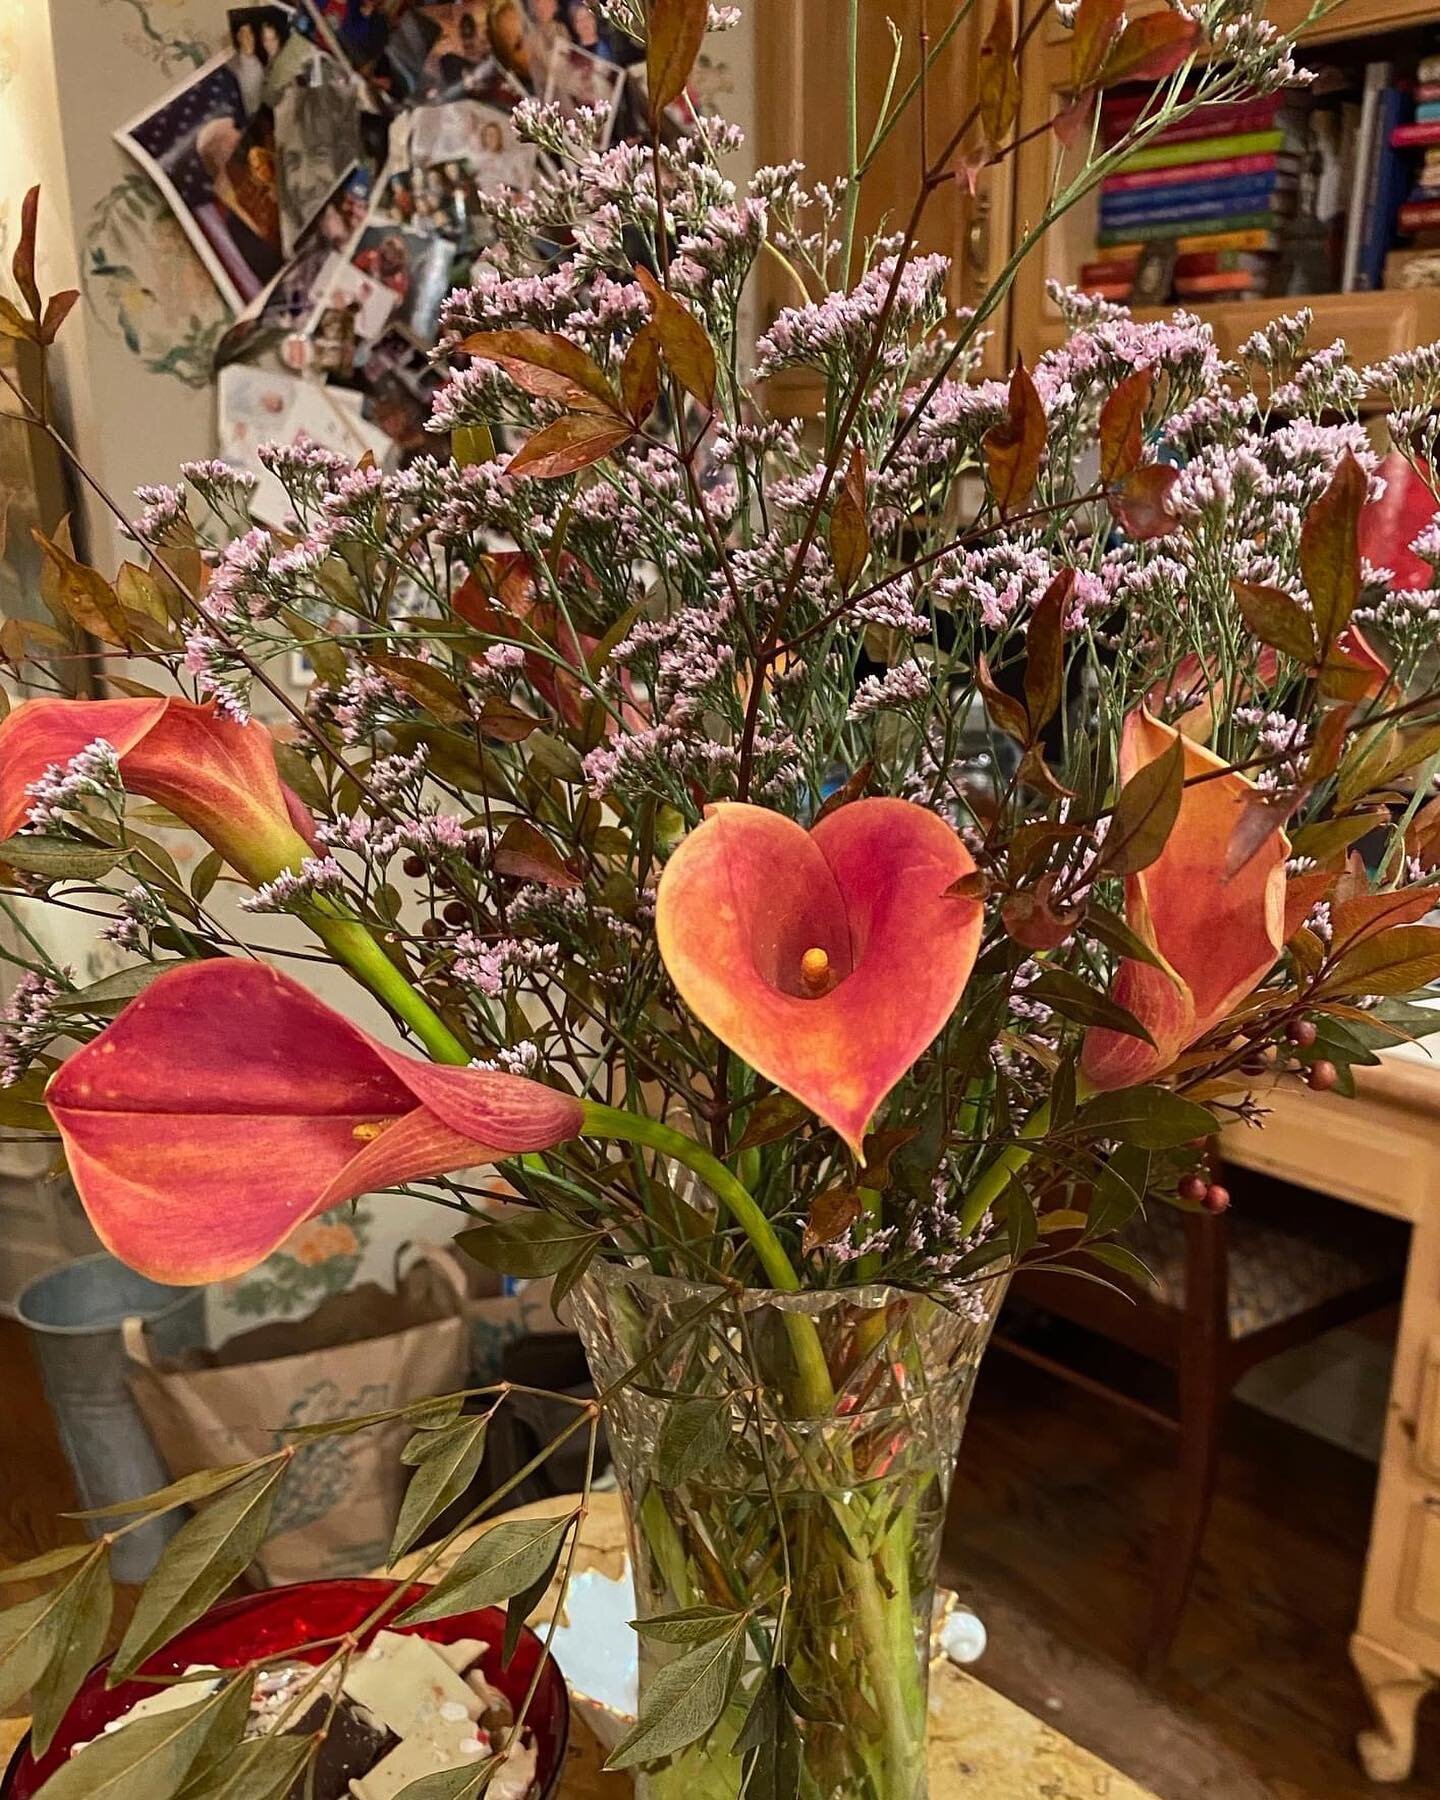 Extra flowers just thrown into a vase at Christmas, and then we notice the heart-shaped Calla Lily... and it was like a trumpet heralding victory! ❤️ &quot;Bless the Lord, O my soul, and forget not all his benefits, who forgives all your iniquity, wh